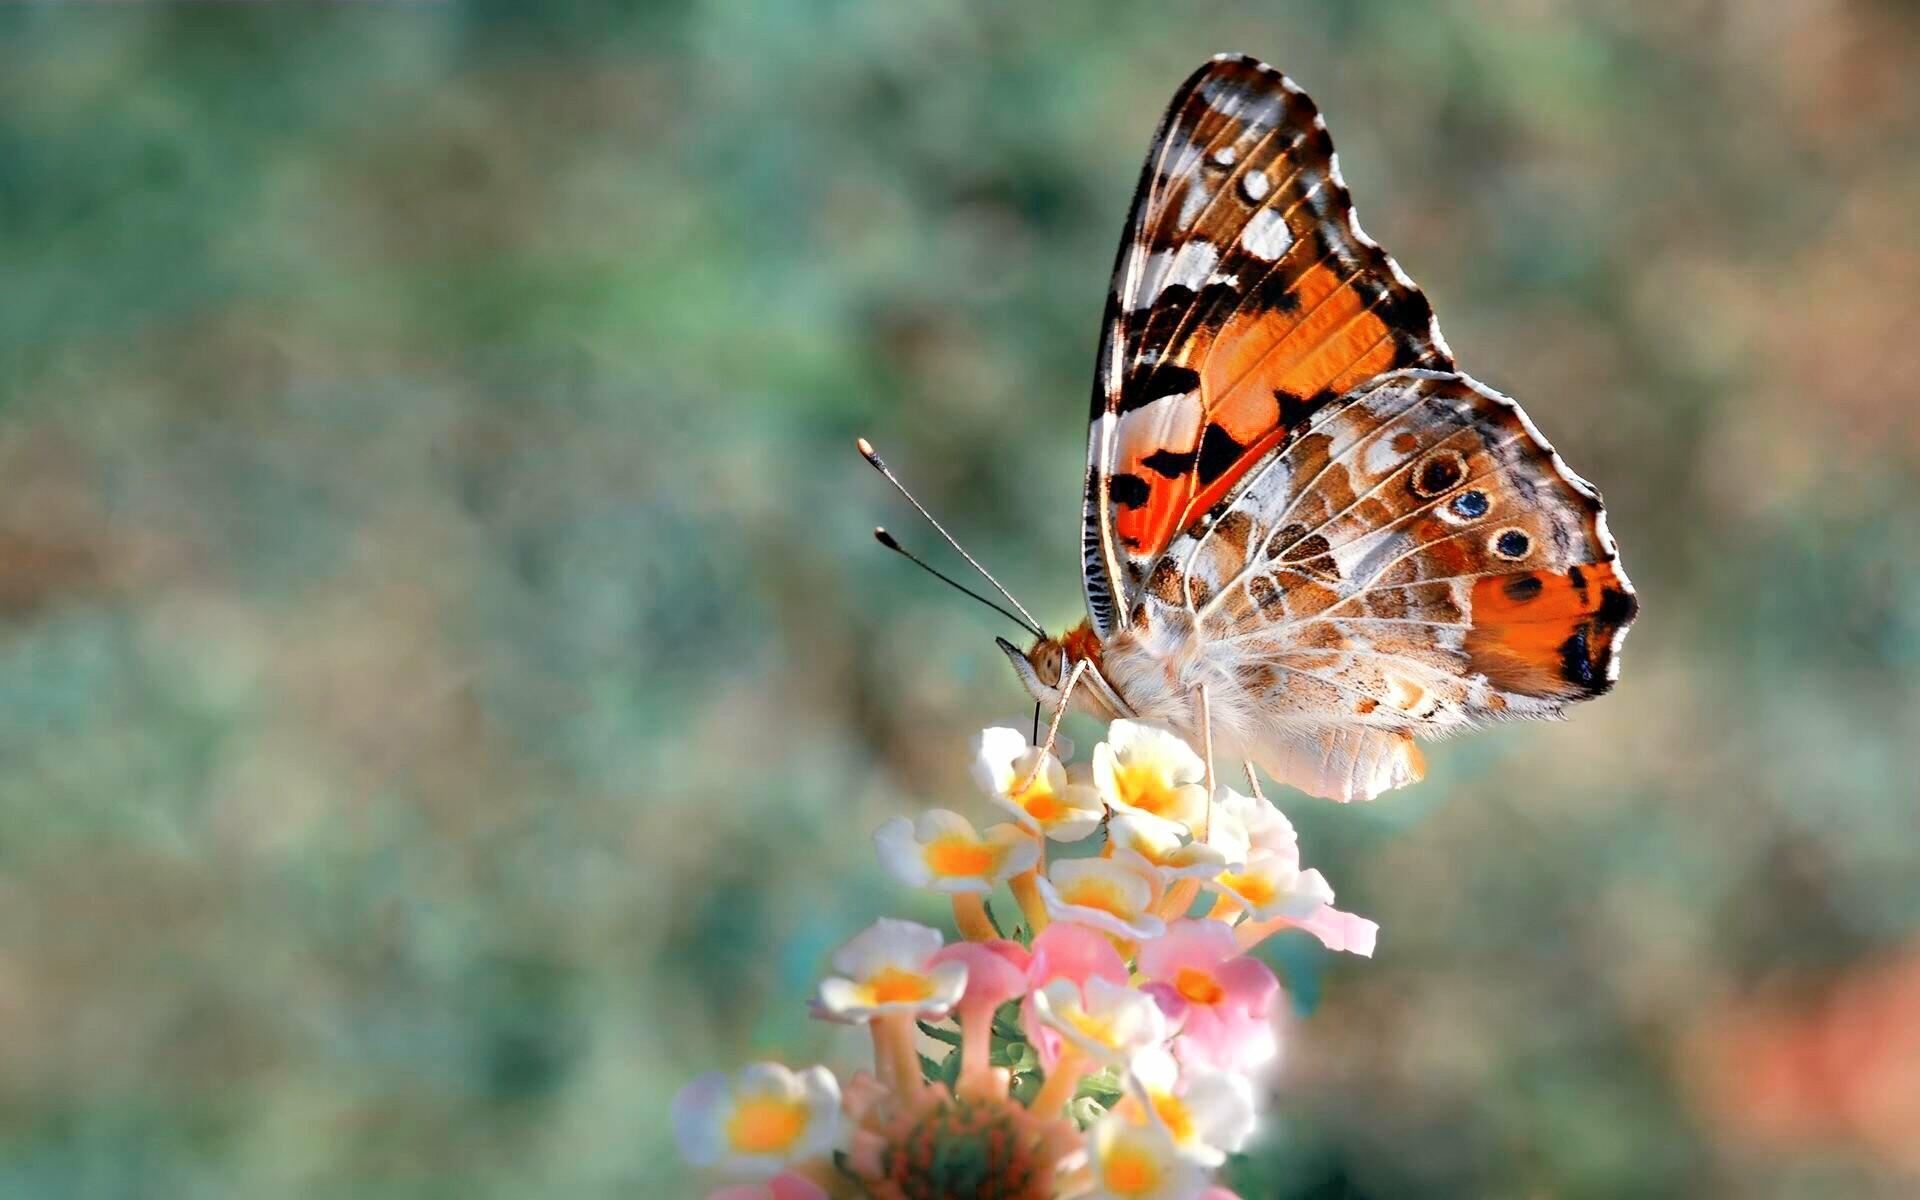 Butterfly wallpapers, Free high definition images, Colorful and vibrant, Delicate and beautiful creatures, 1920x1200 HD Desktop